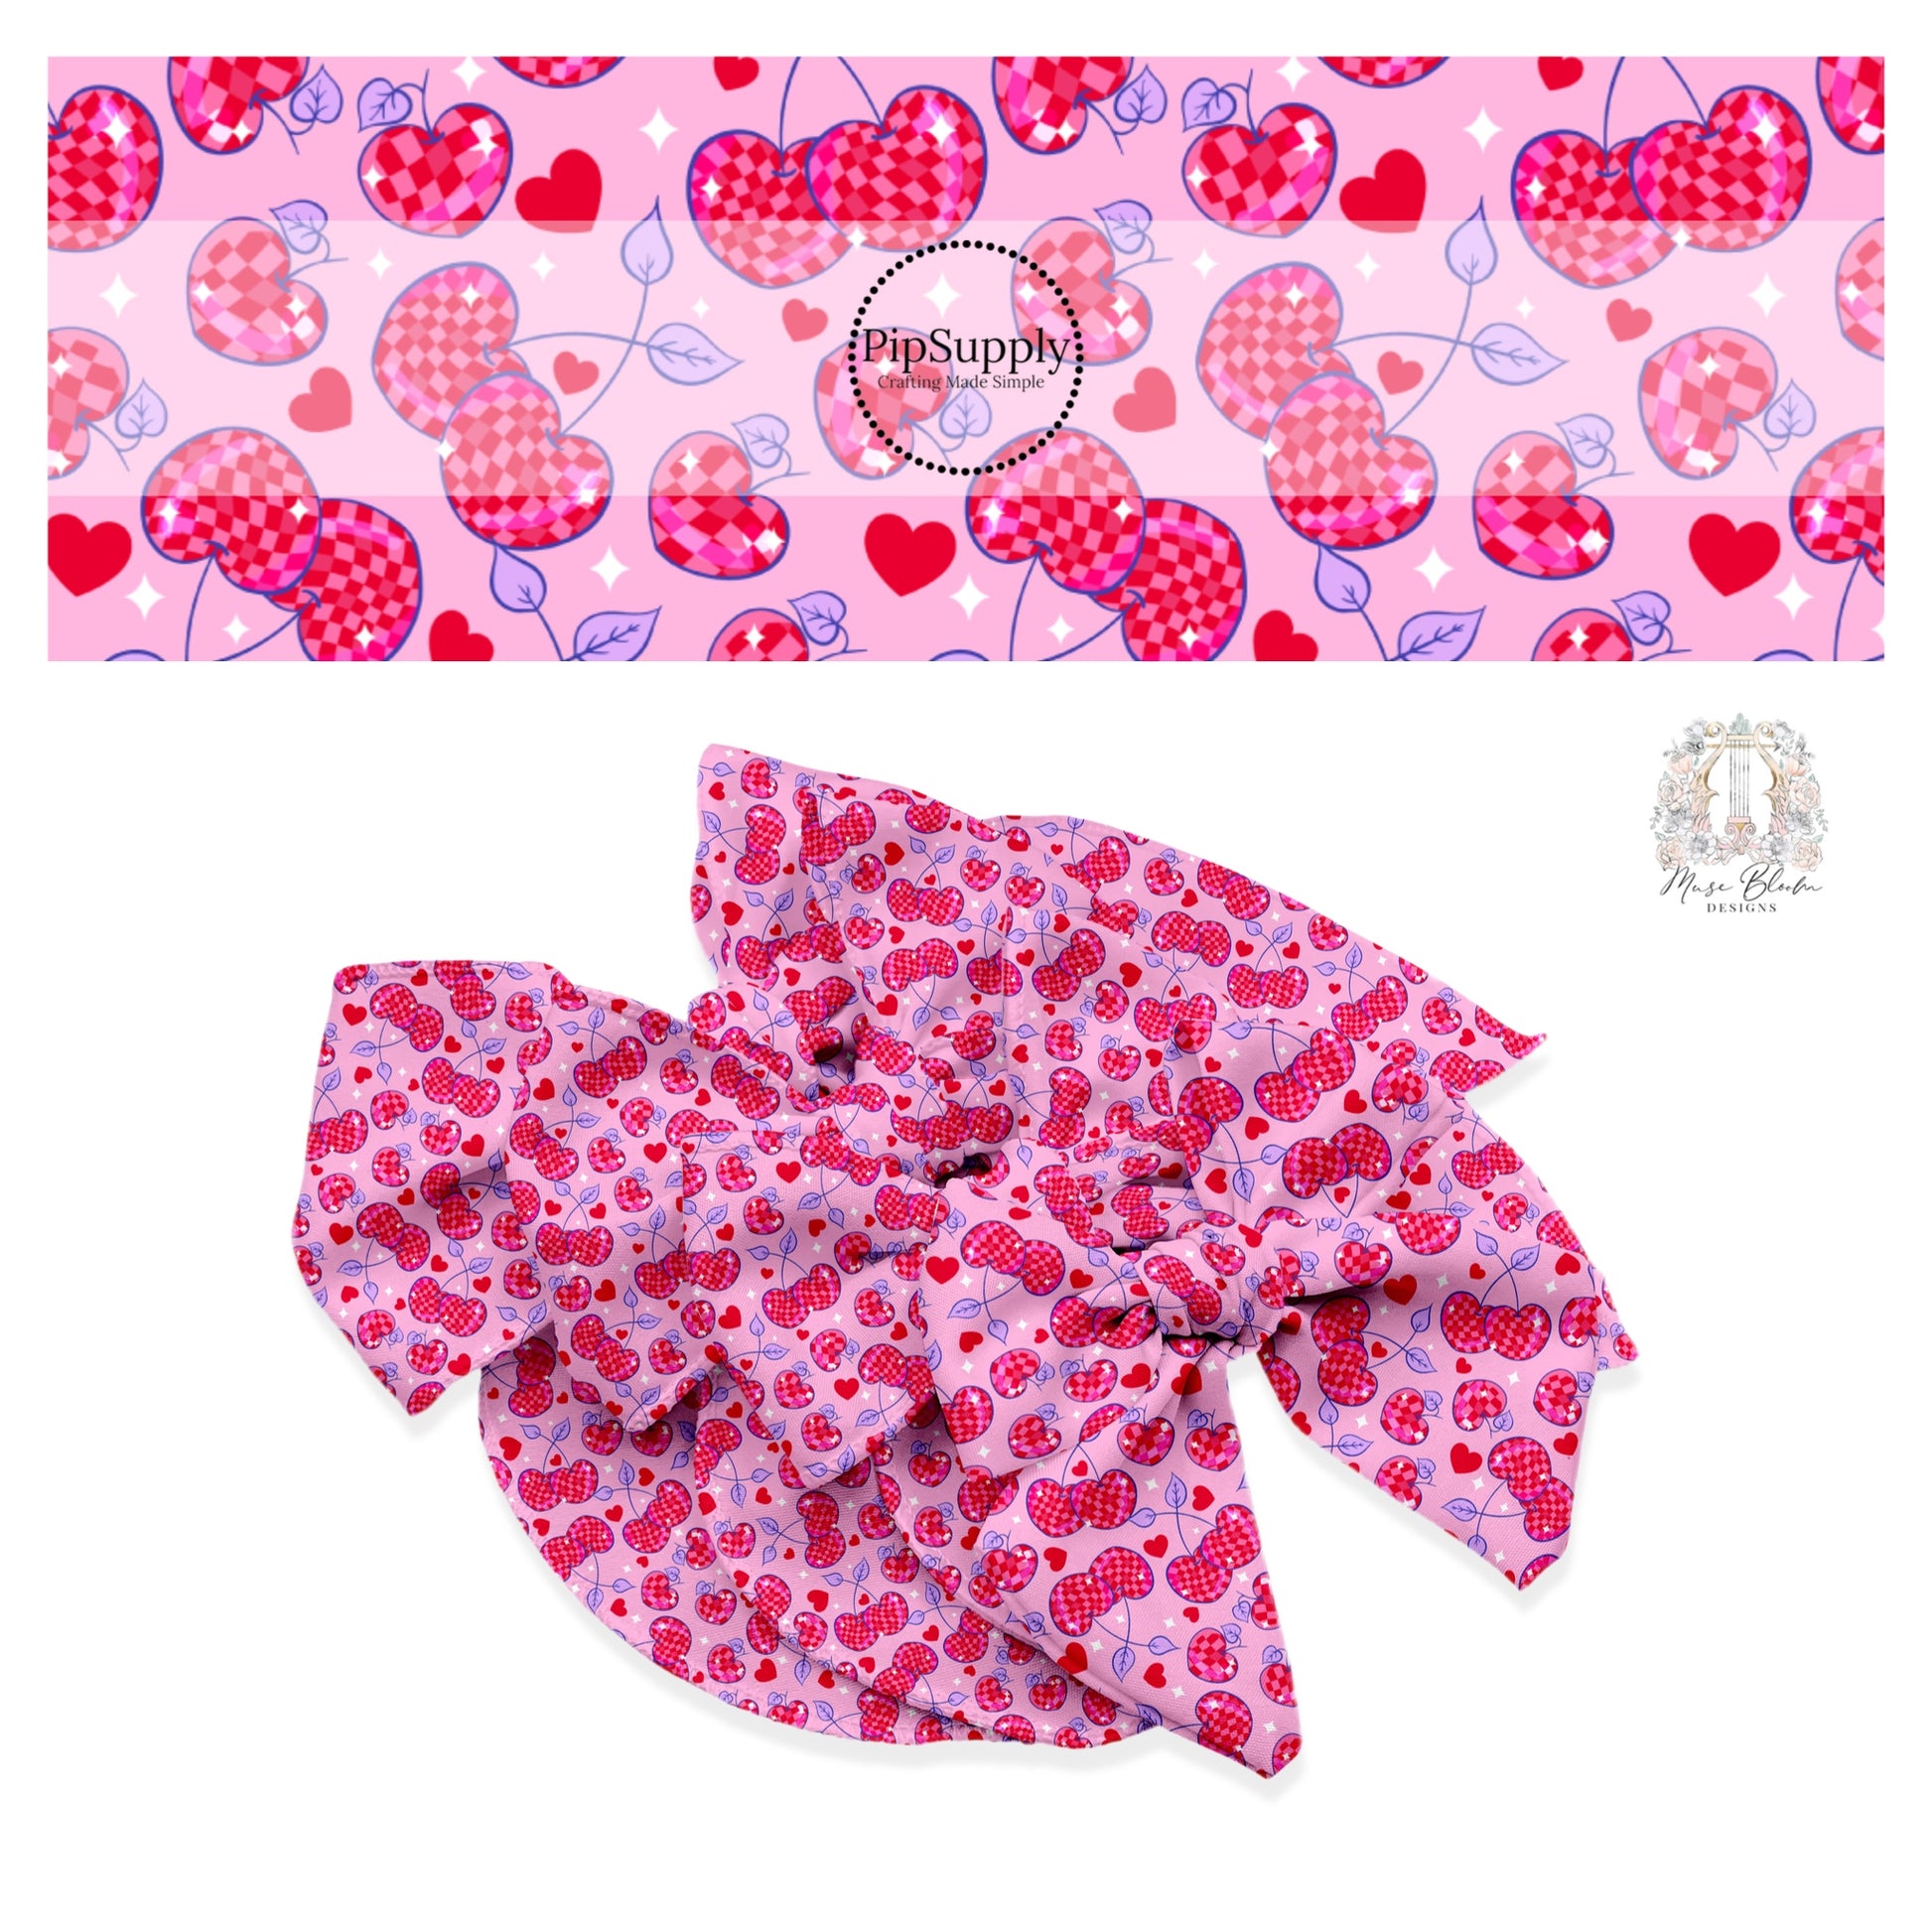 Purple outlined pink and red cherries with white sparkles and red hearts on a pink bow strip